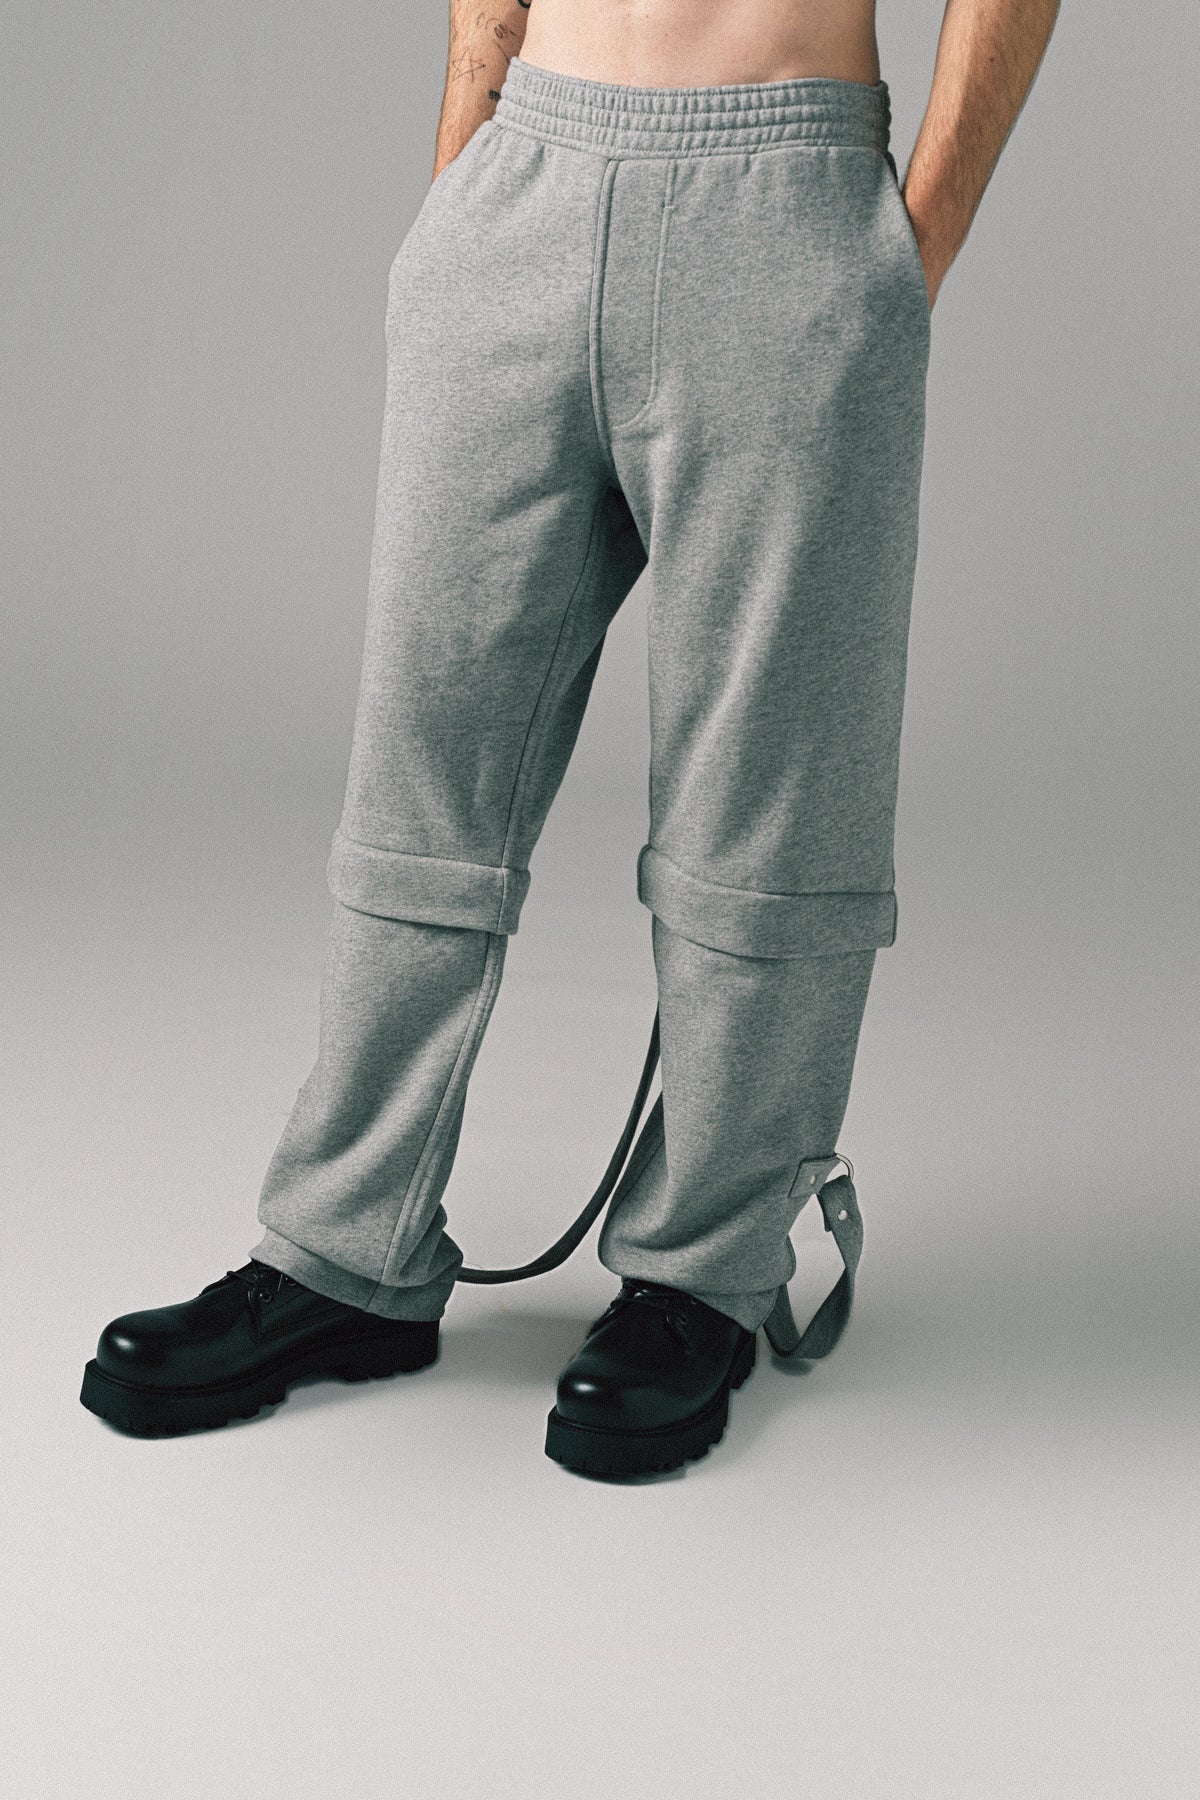 GIVENCHY | DETACHABLE JERSEY PANTS